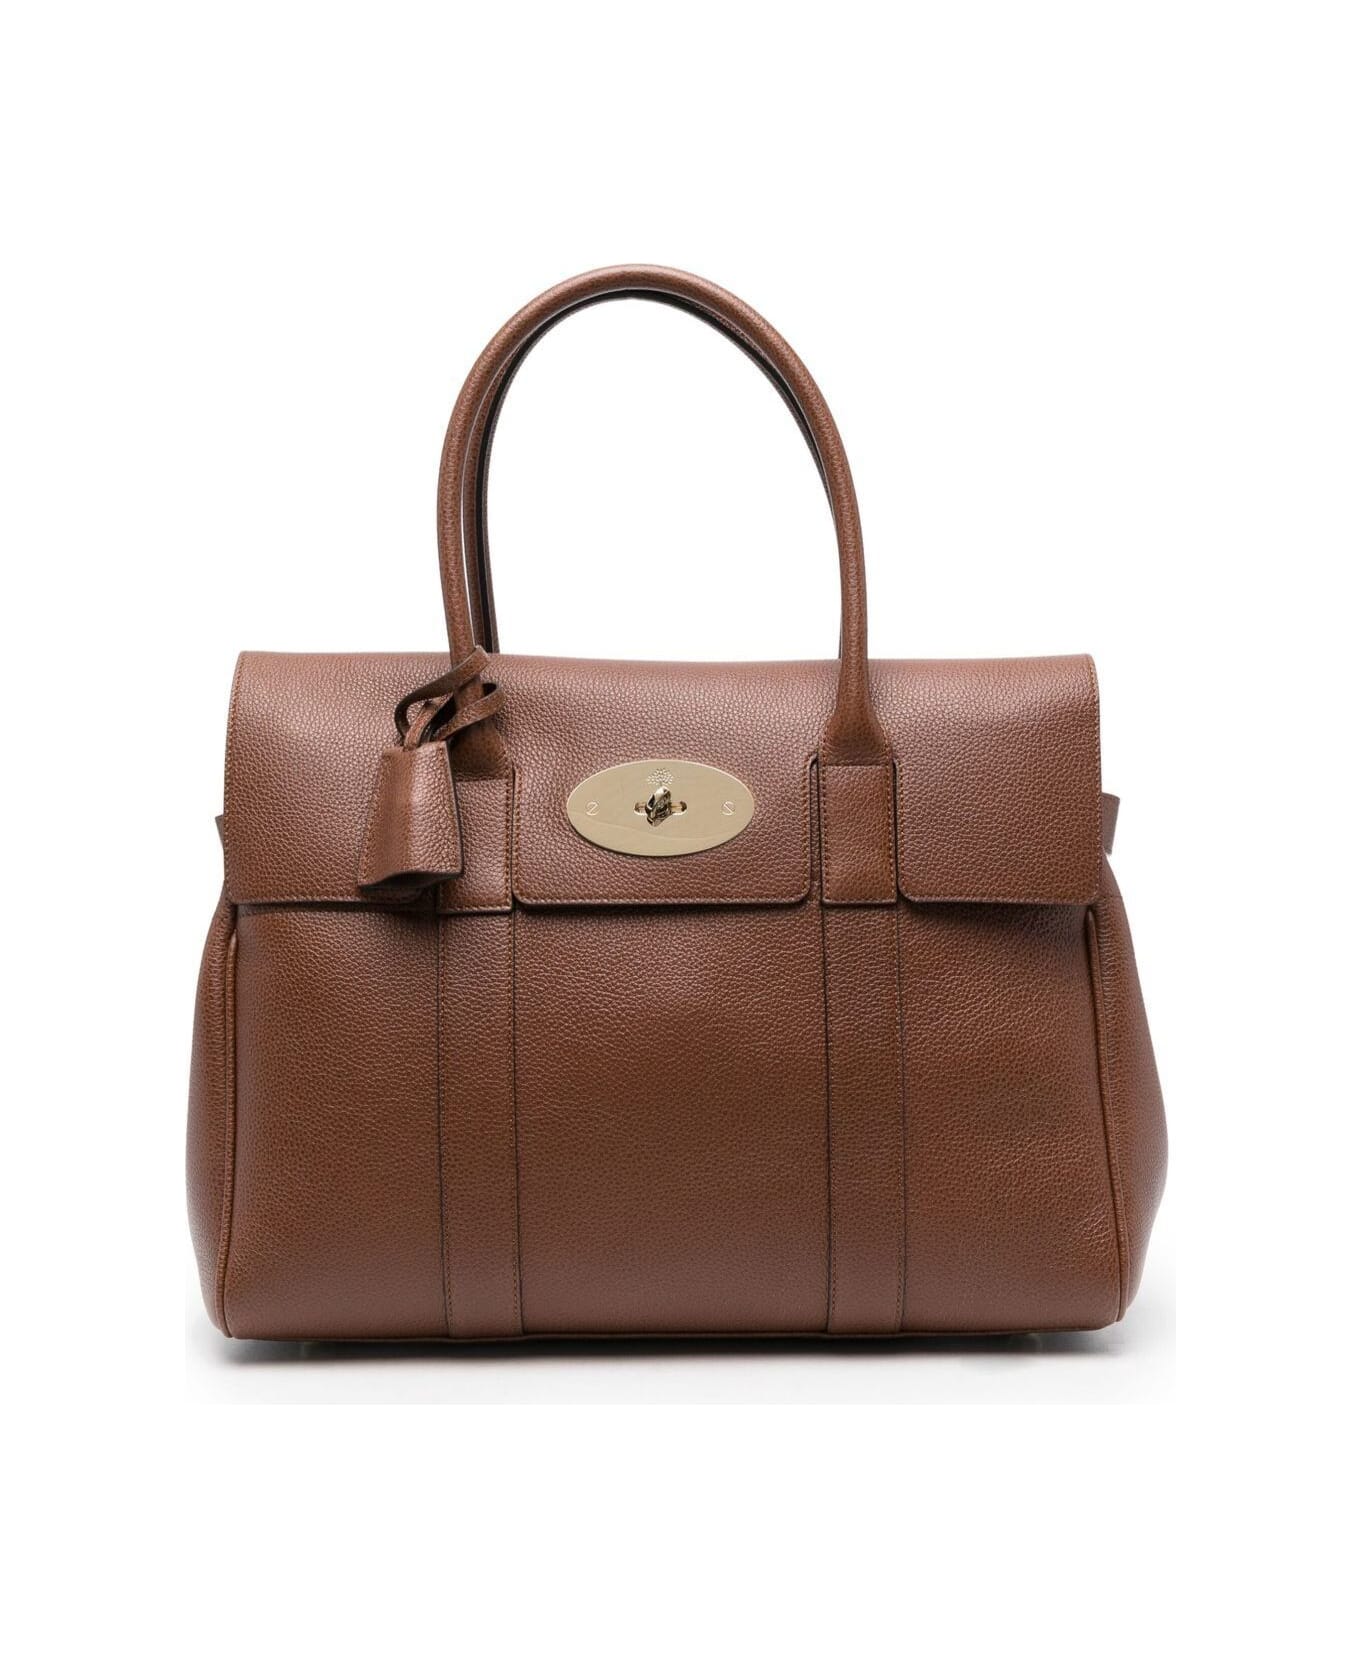 Mulberry Bayswater Brown Leather Handbag Mulberry Woman - Brown トートバッグ